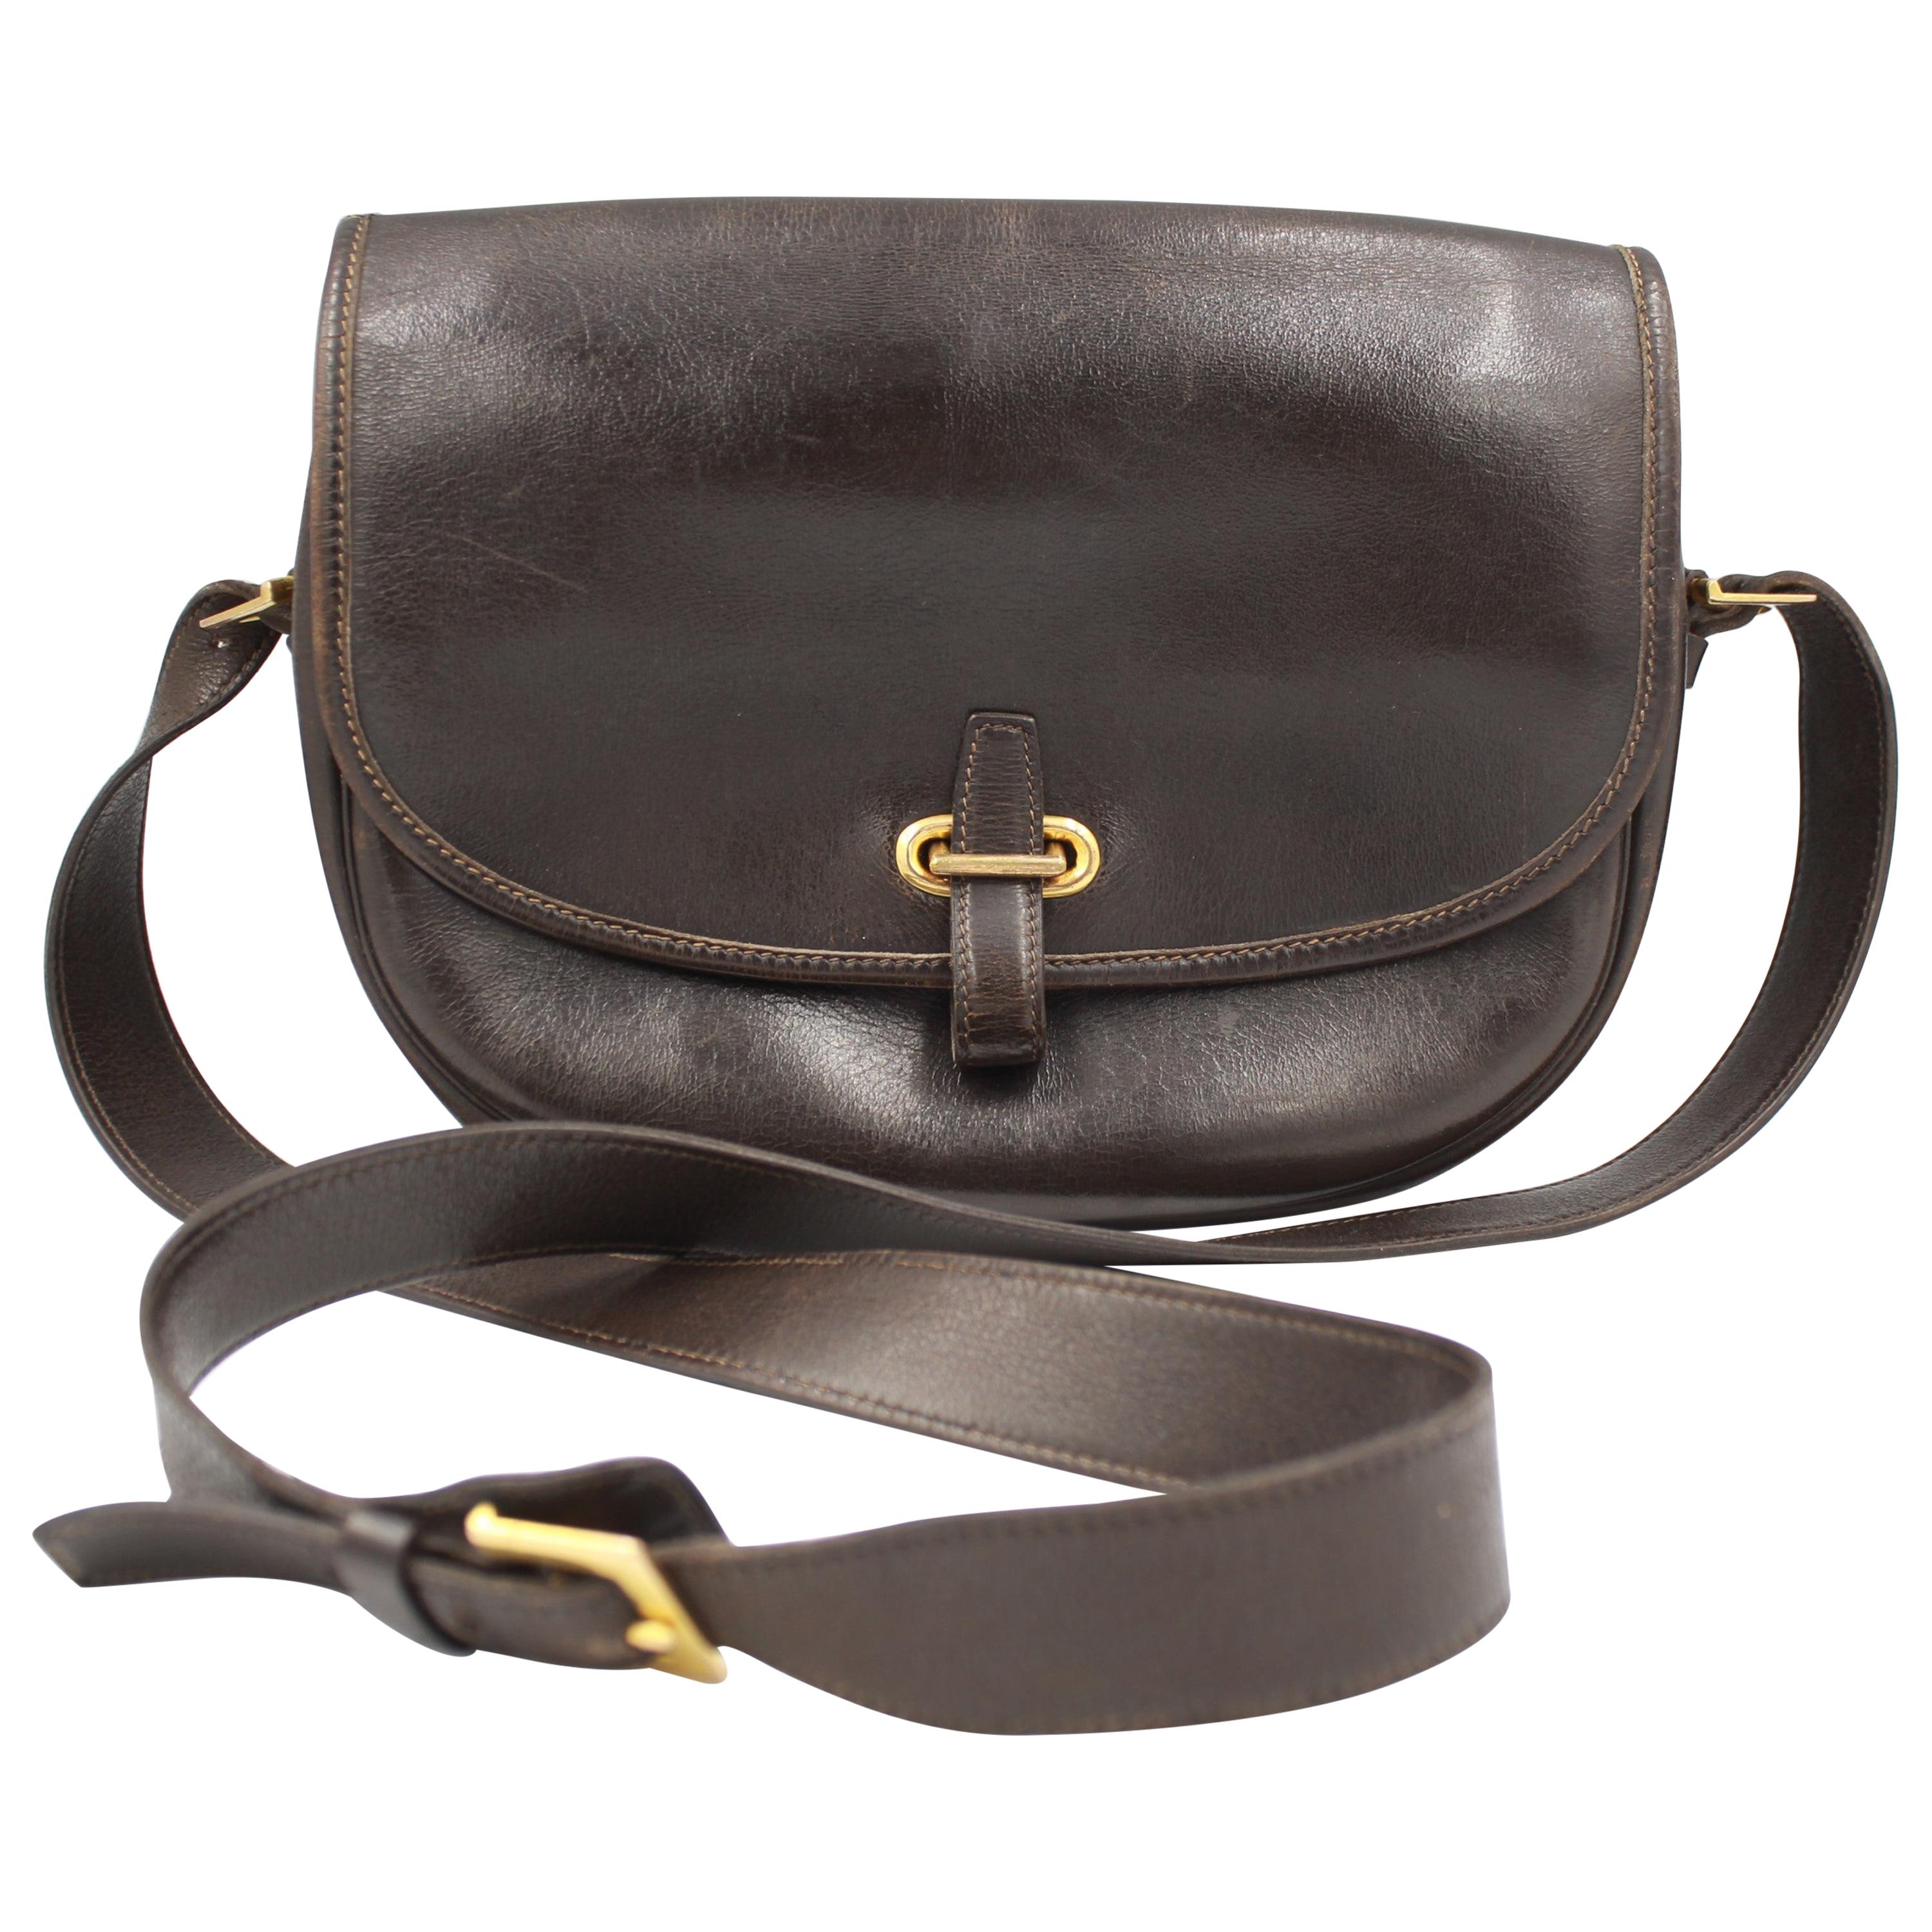 Gold Balle de Golf in Courchevel Leather with Gold Hardware, 1971, Handbags & Accessories, 2021